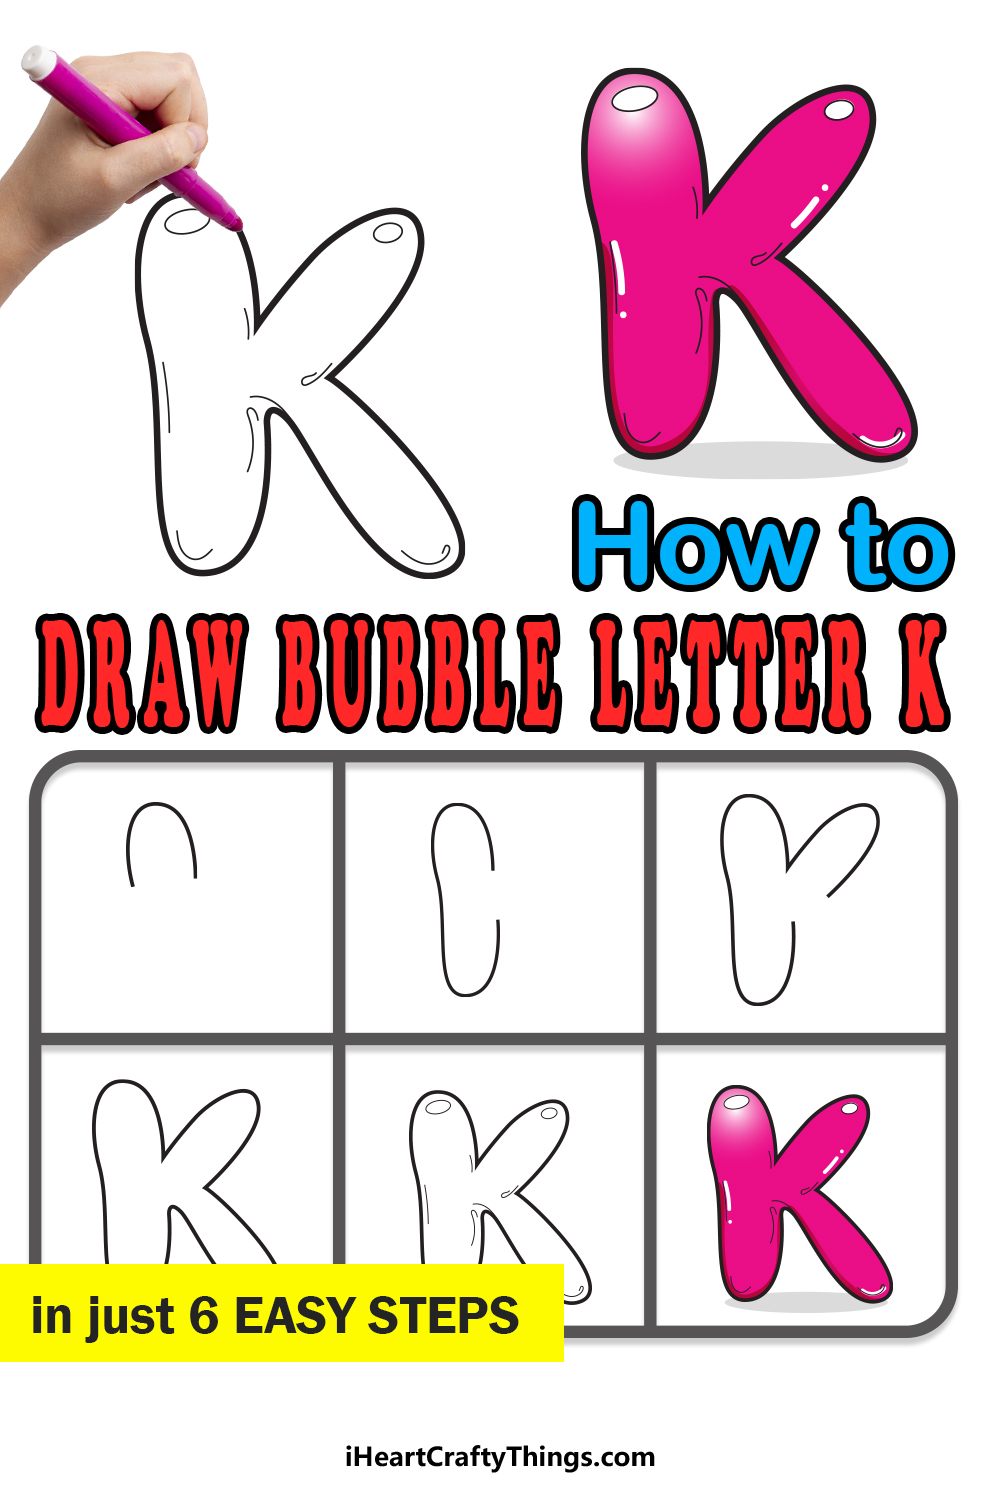 How To Draw Your Own Bubble K step by step guide